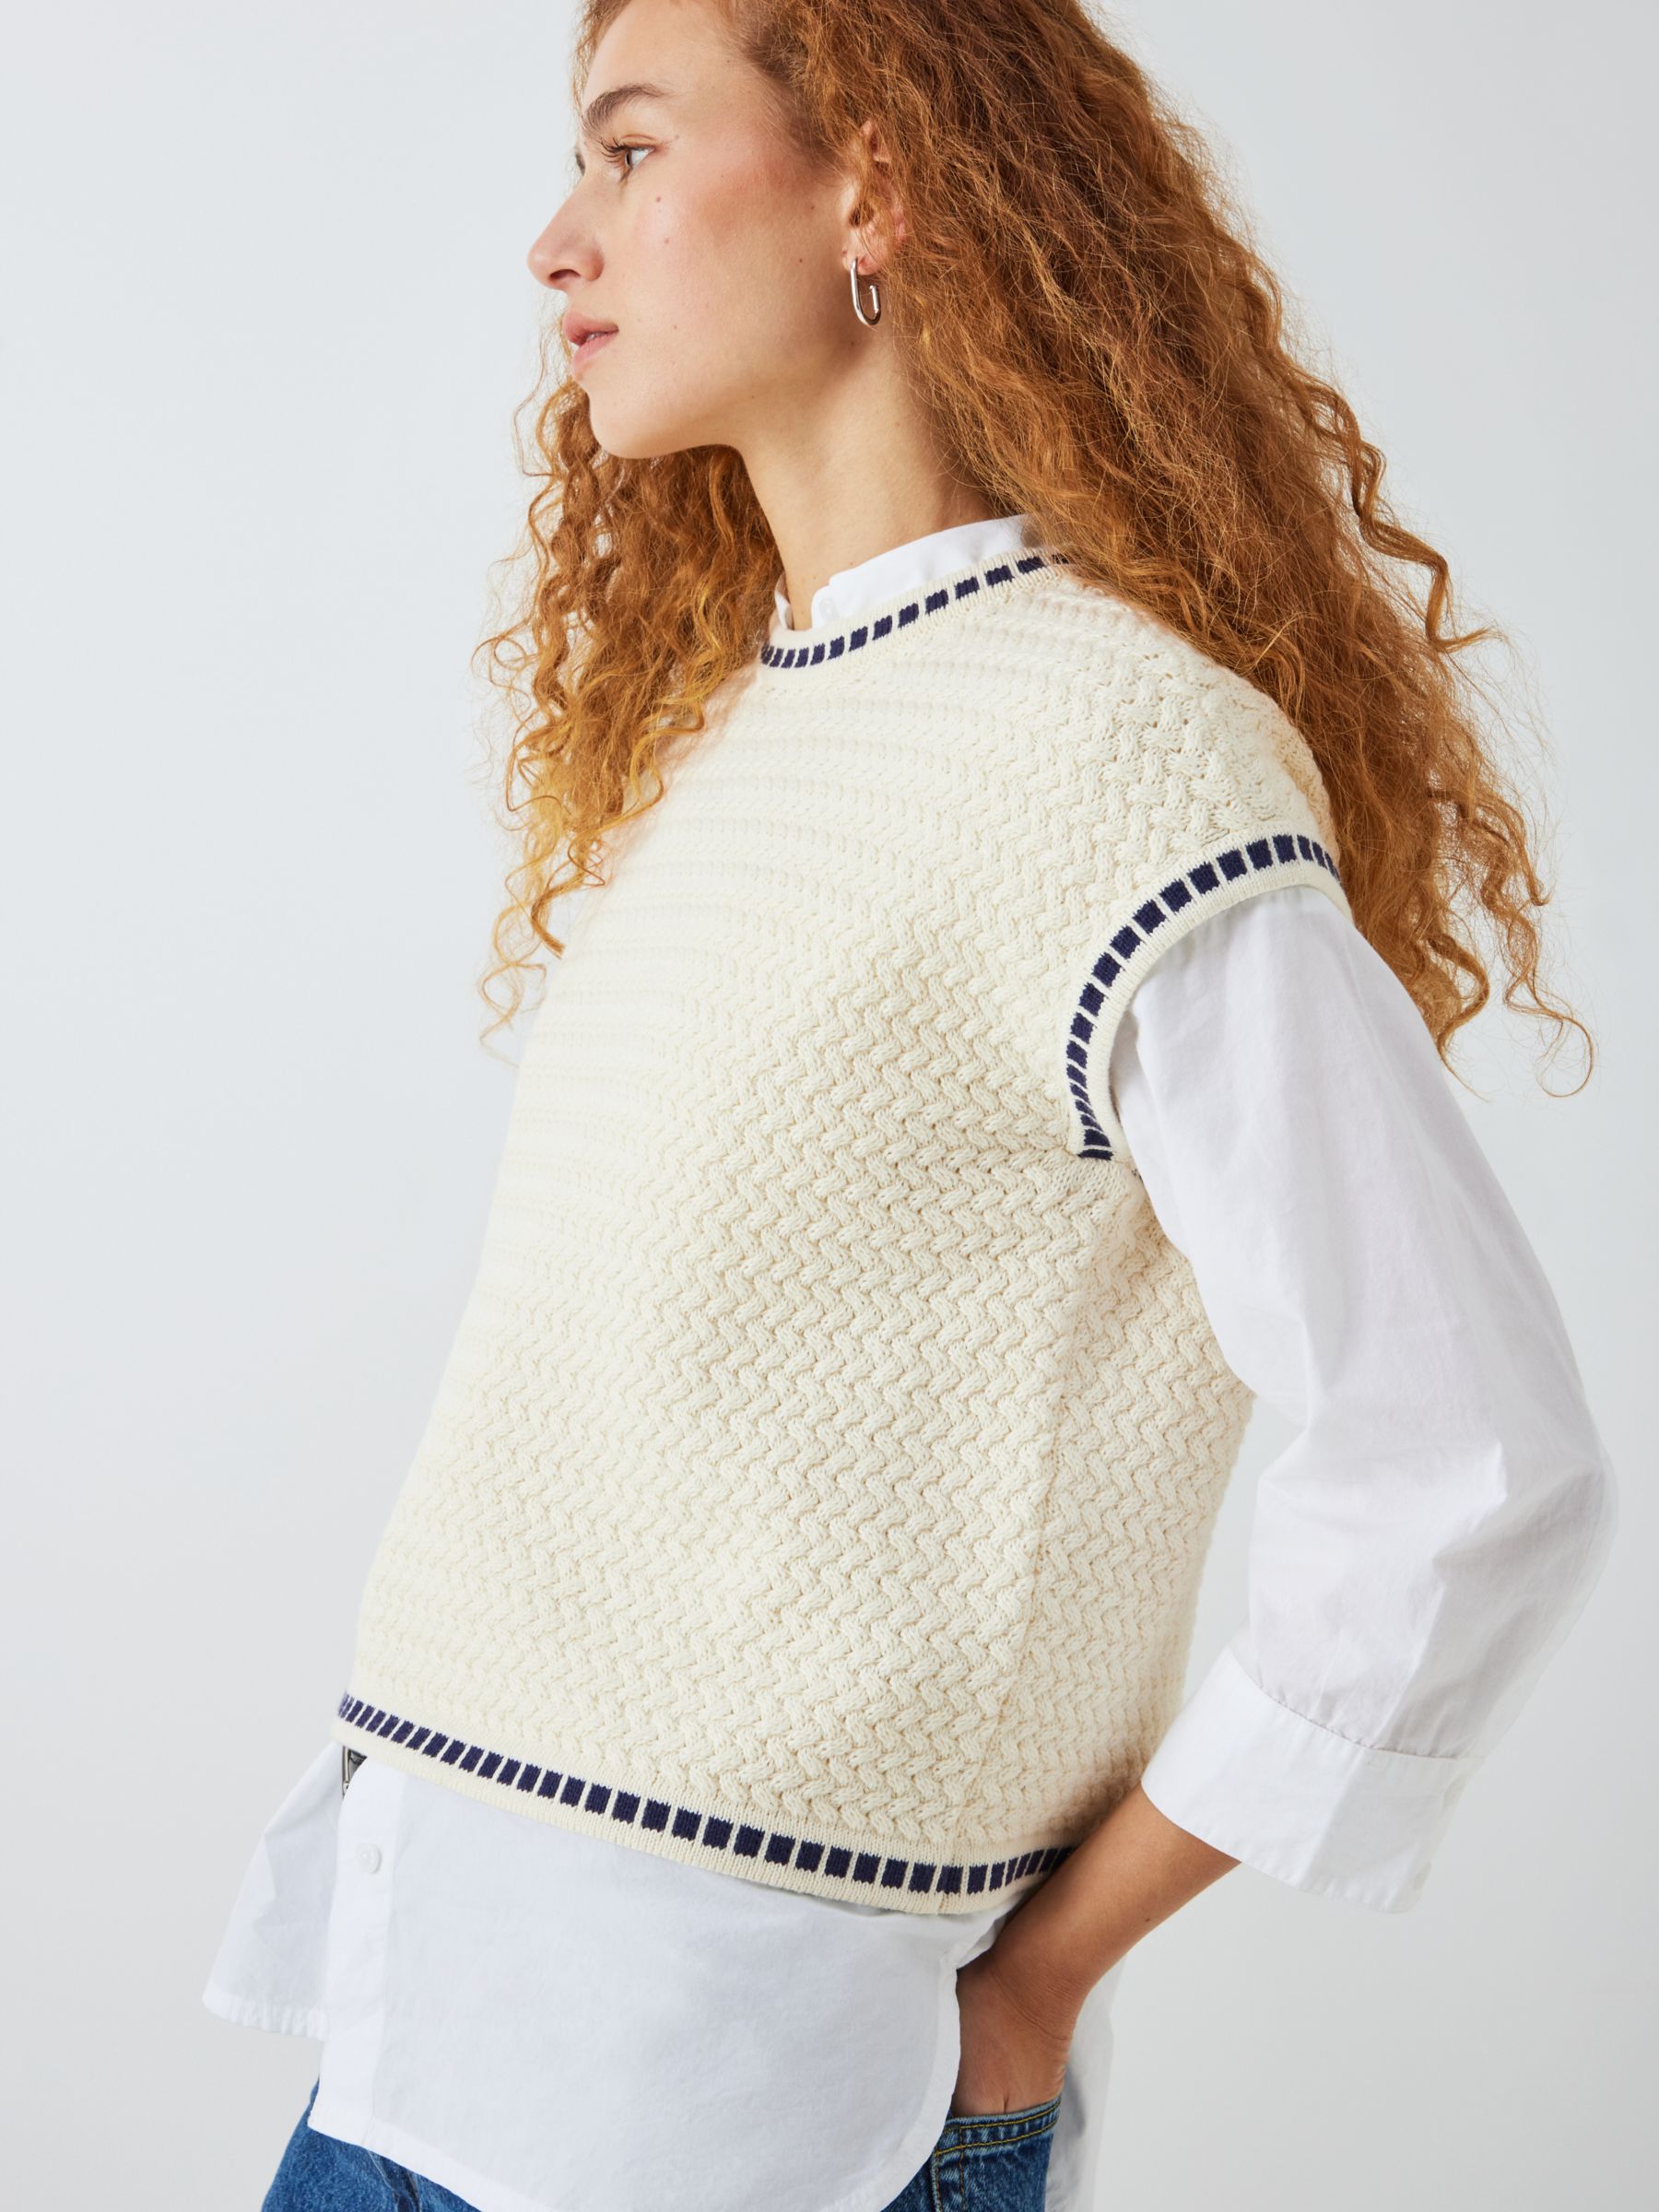 Buy John Lewis ANYDAY Textured Stitch Knit Tank Top, Ivory/Navy Online at johnlewis.com